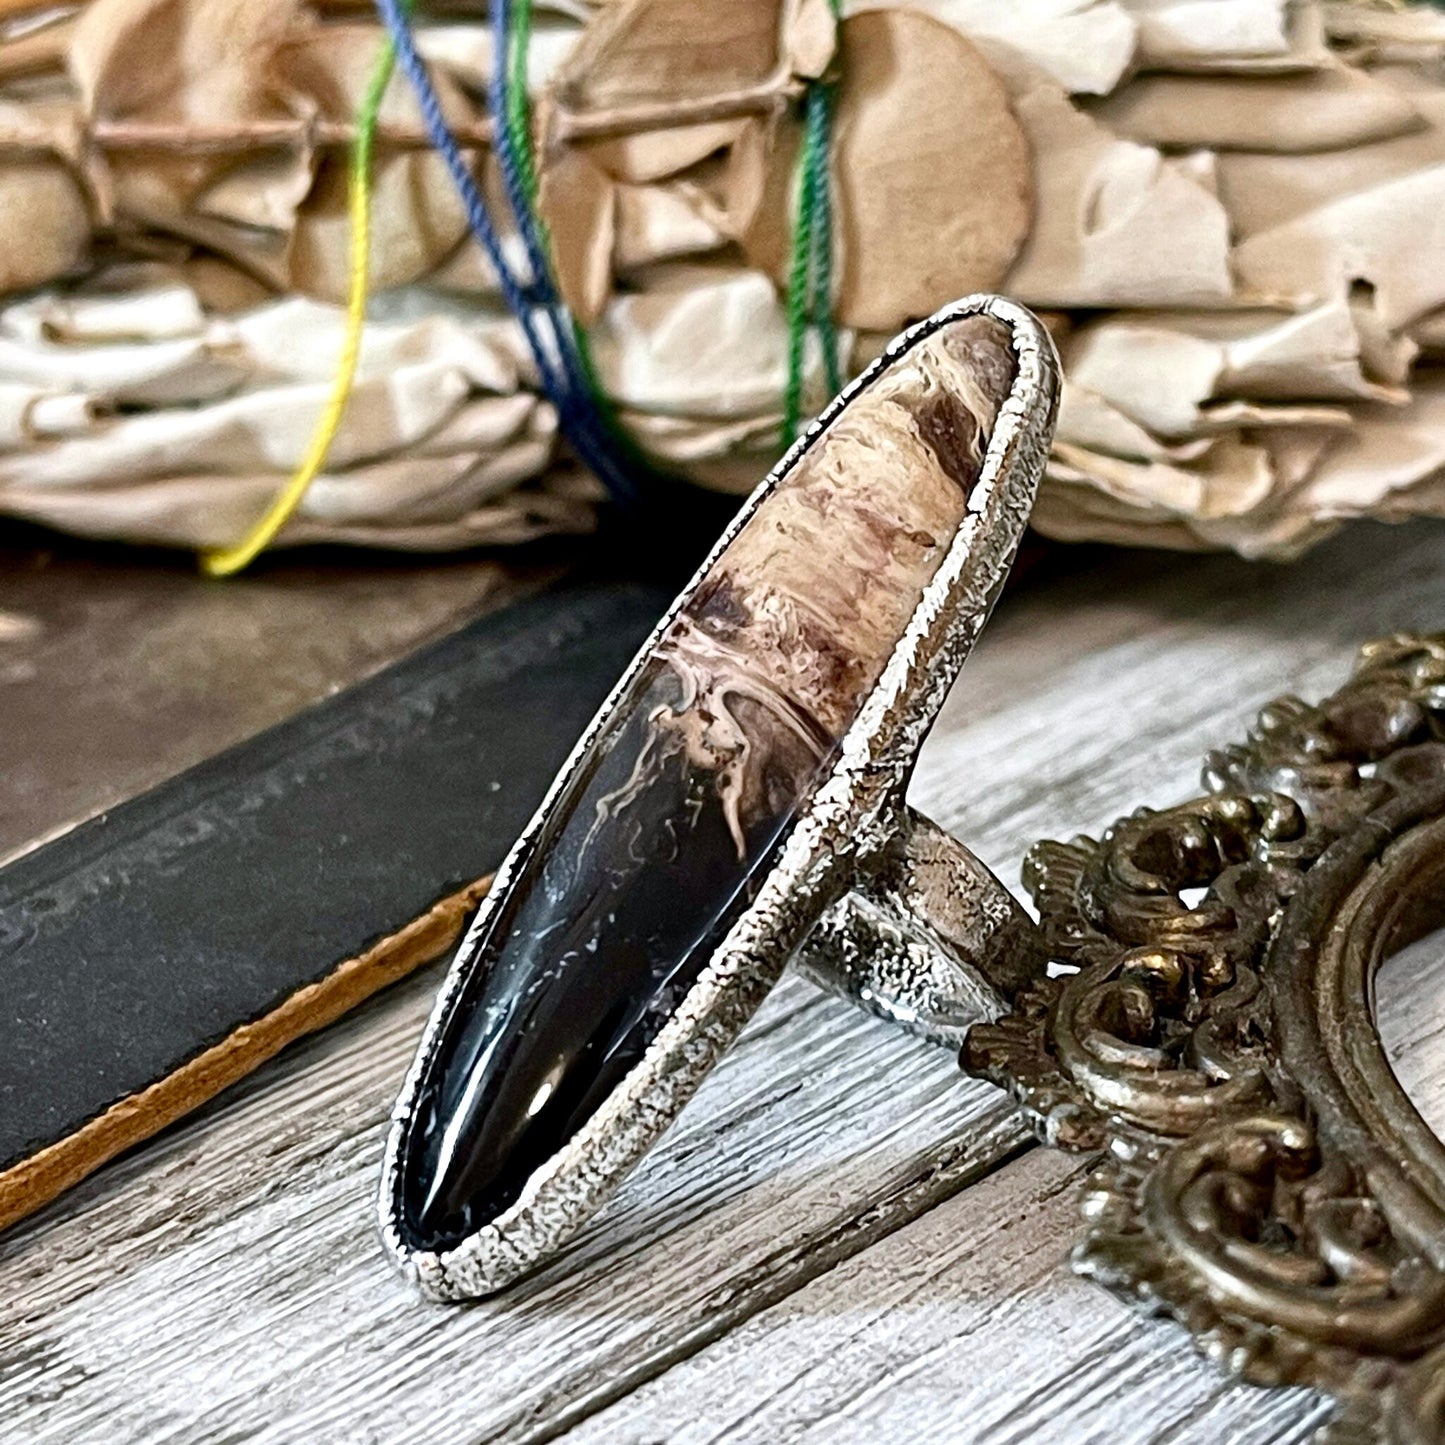 Big Bold Jewelry, Big Crystal Ring, Big Silver Ring, Big Stone Ring, Etsy ID: 1352850702, Fossilized Palm Root, FOXLARK- RINGS, Jewelry, Large Boho Ring, Large Crystal Ring, Large Stone Ring, Natural stone ring, Rings, silver crystal ring, Silver Stone Je